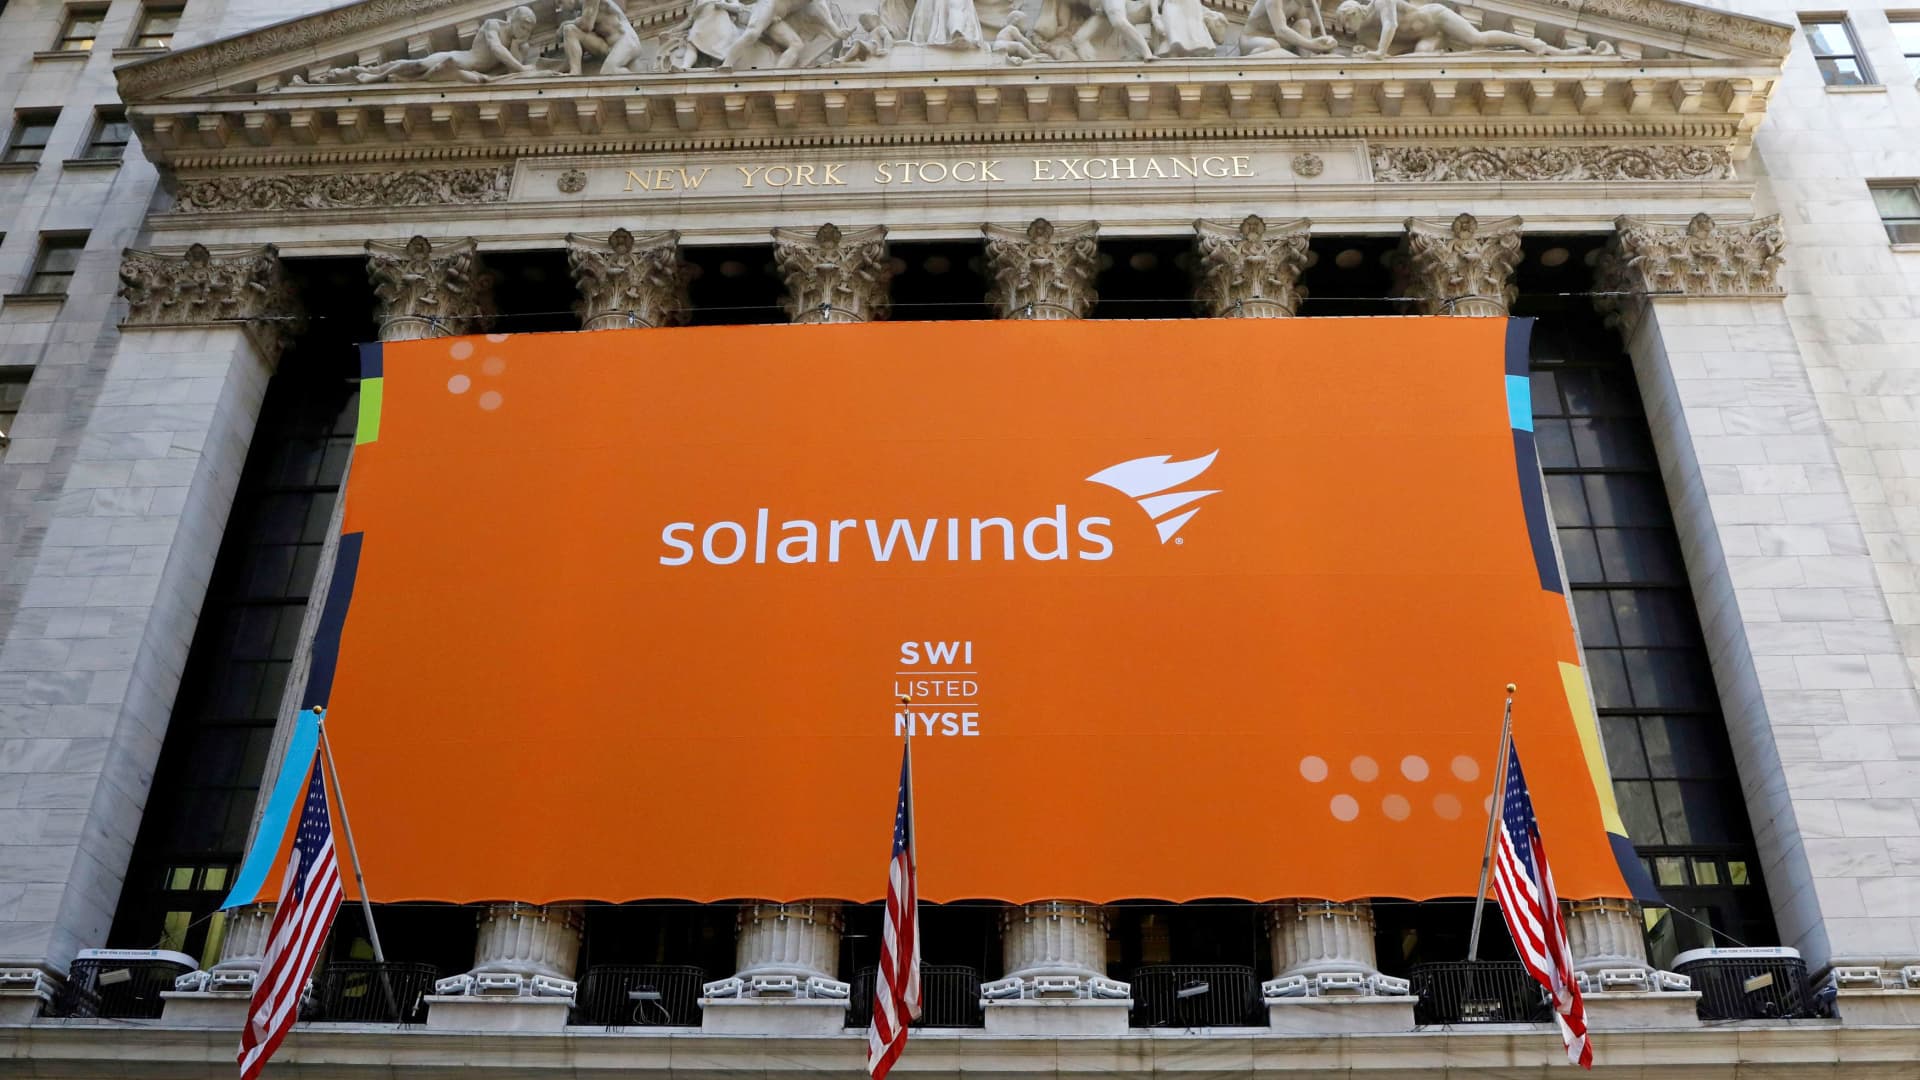 SEC alleges SolarWinds and key executive misled investors about cybersecurity prior to ‘massive’ cyberattack